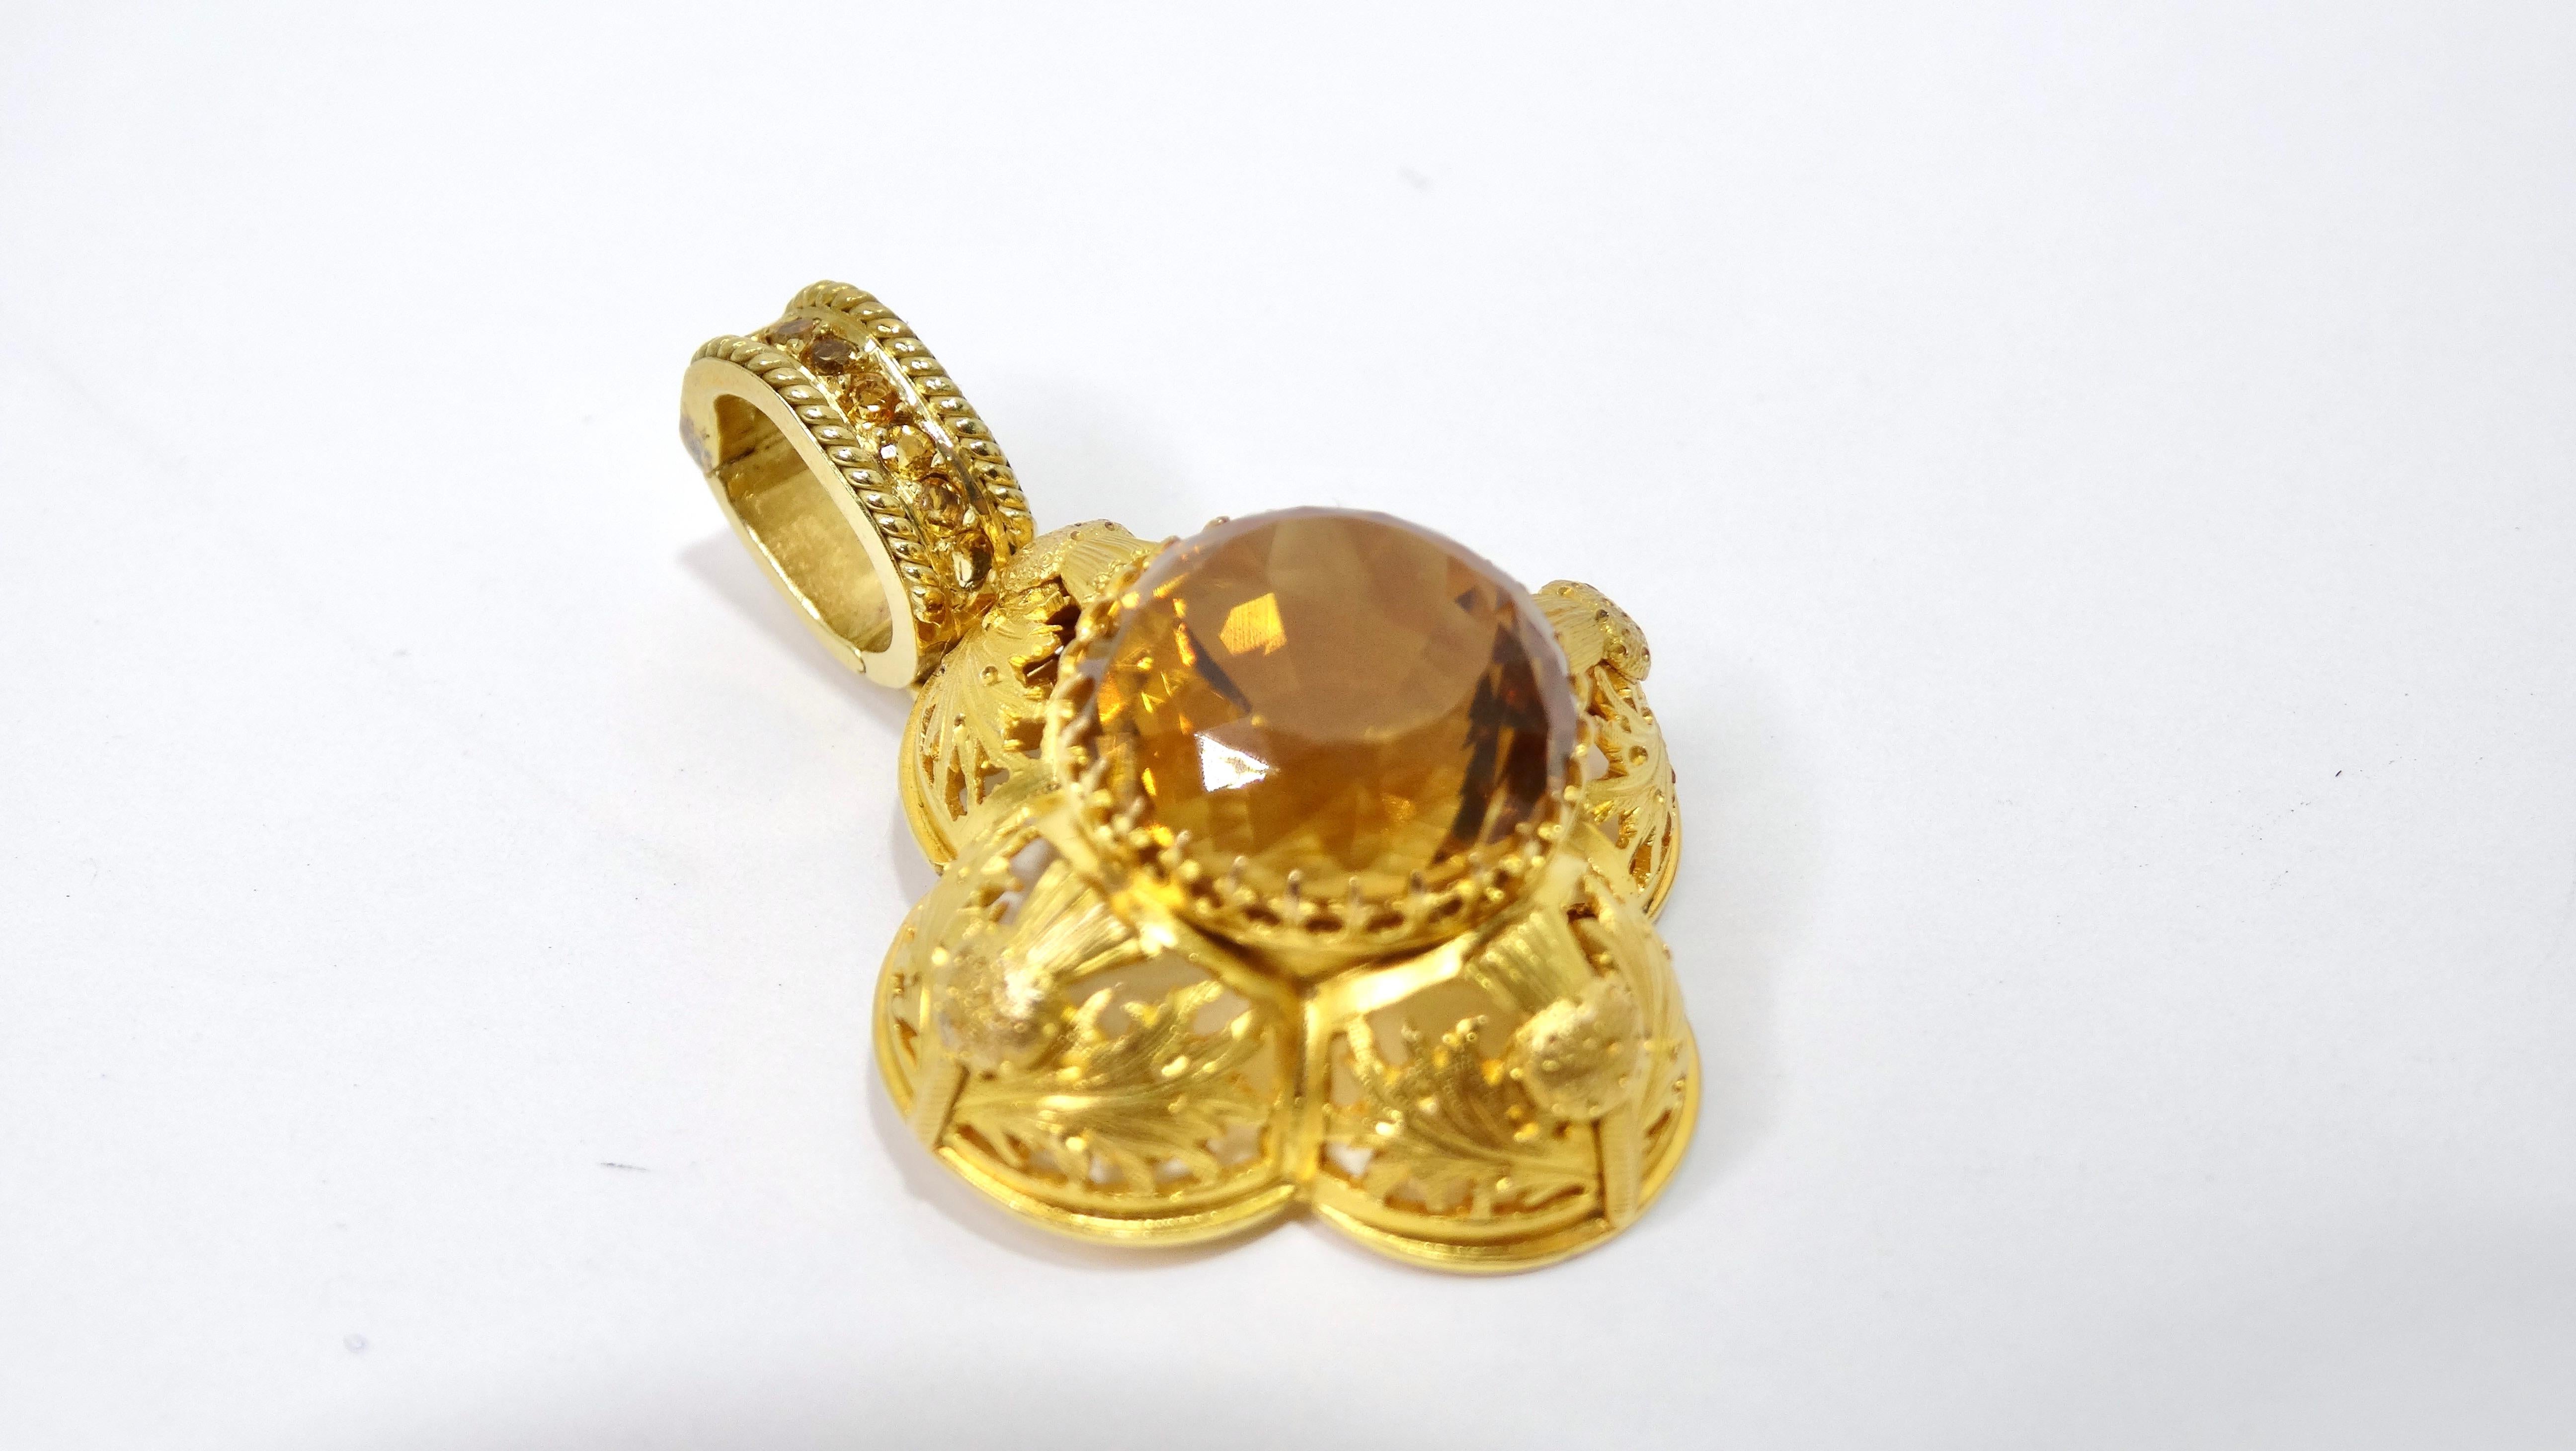 An exquisite and ornate pendant will be perfect to pair with your gold chain! This pendant is made of a beautiful and vibrant 18k gold with a large citrine stone in the middle of a shape resembling a flower. This vintage gem would look great with